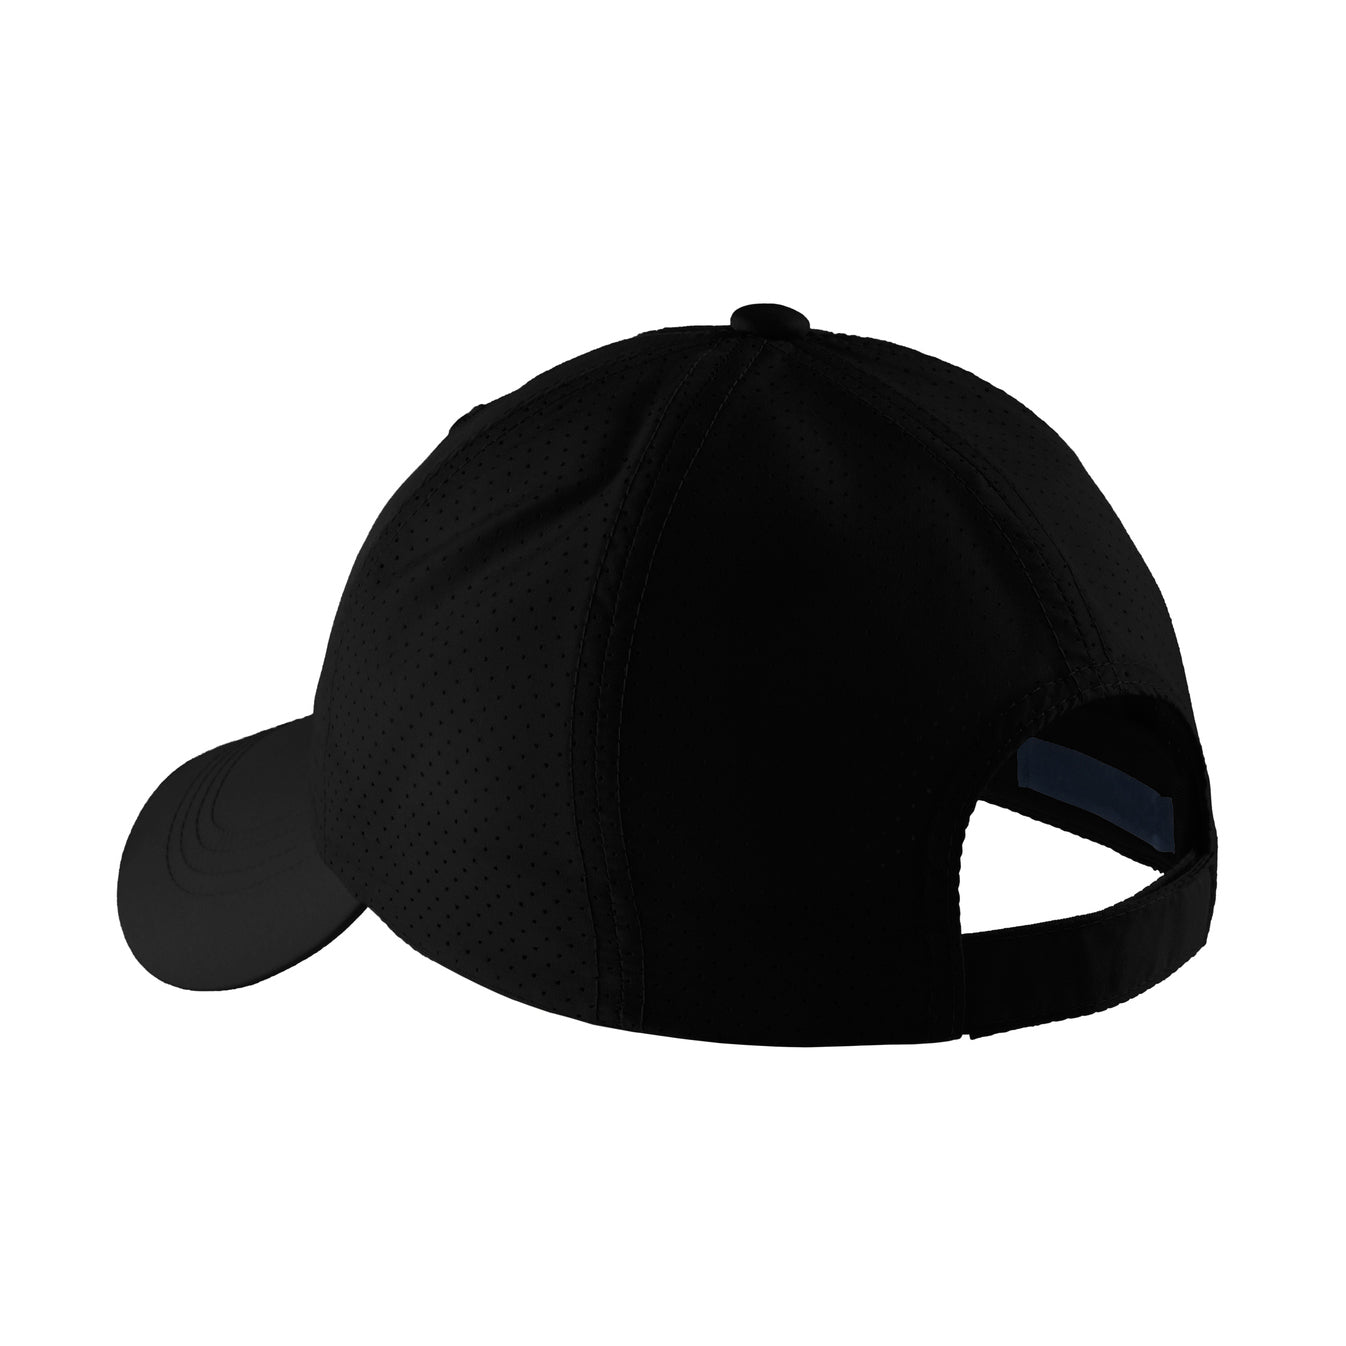 Back panel view of the Neue Performance Trucker Hat by Neue Supply Co. is perfect for the gym and working out in all black with perforated back panels